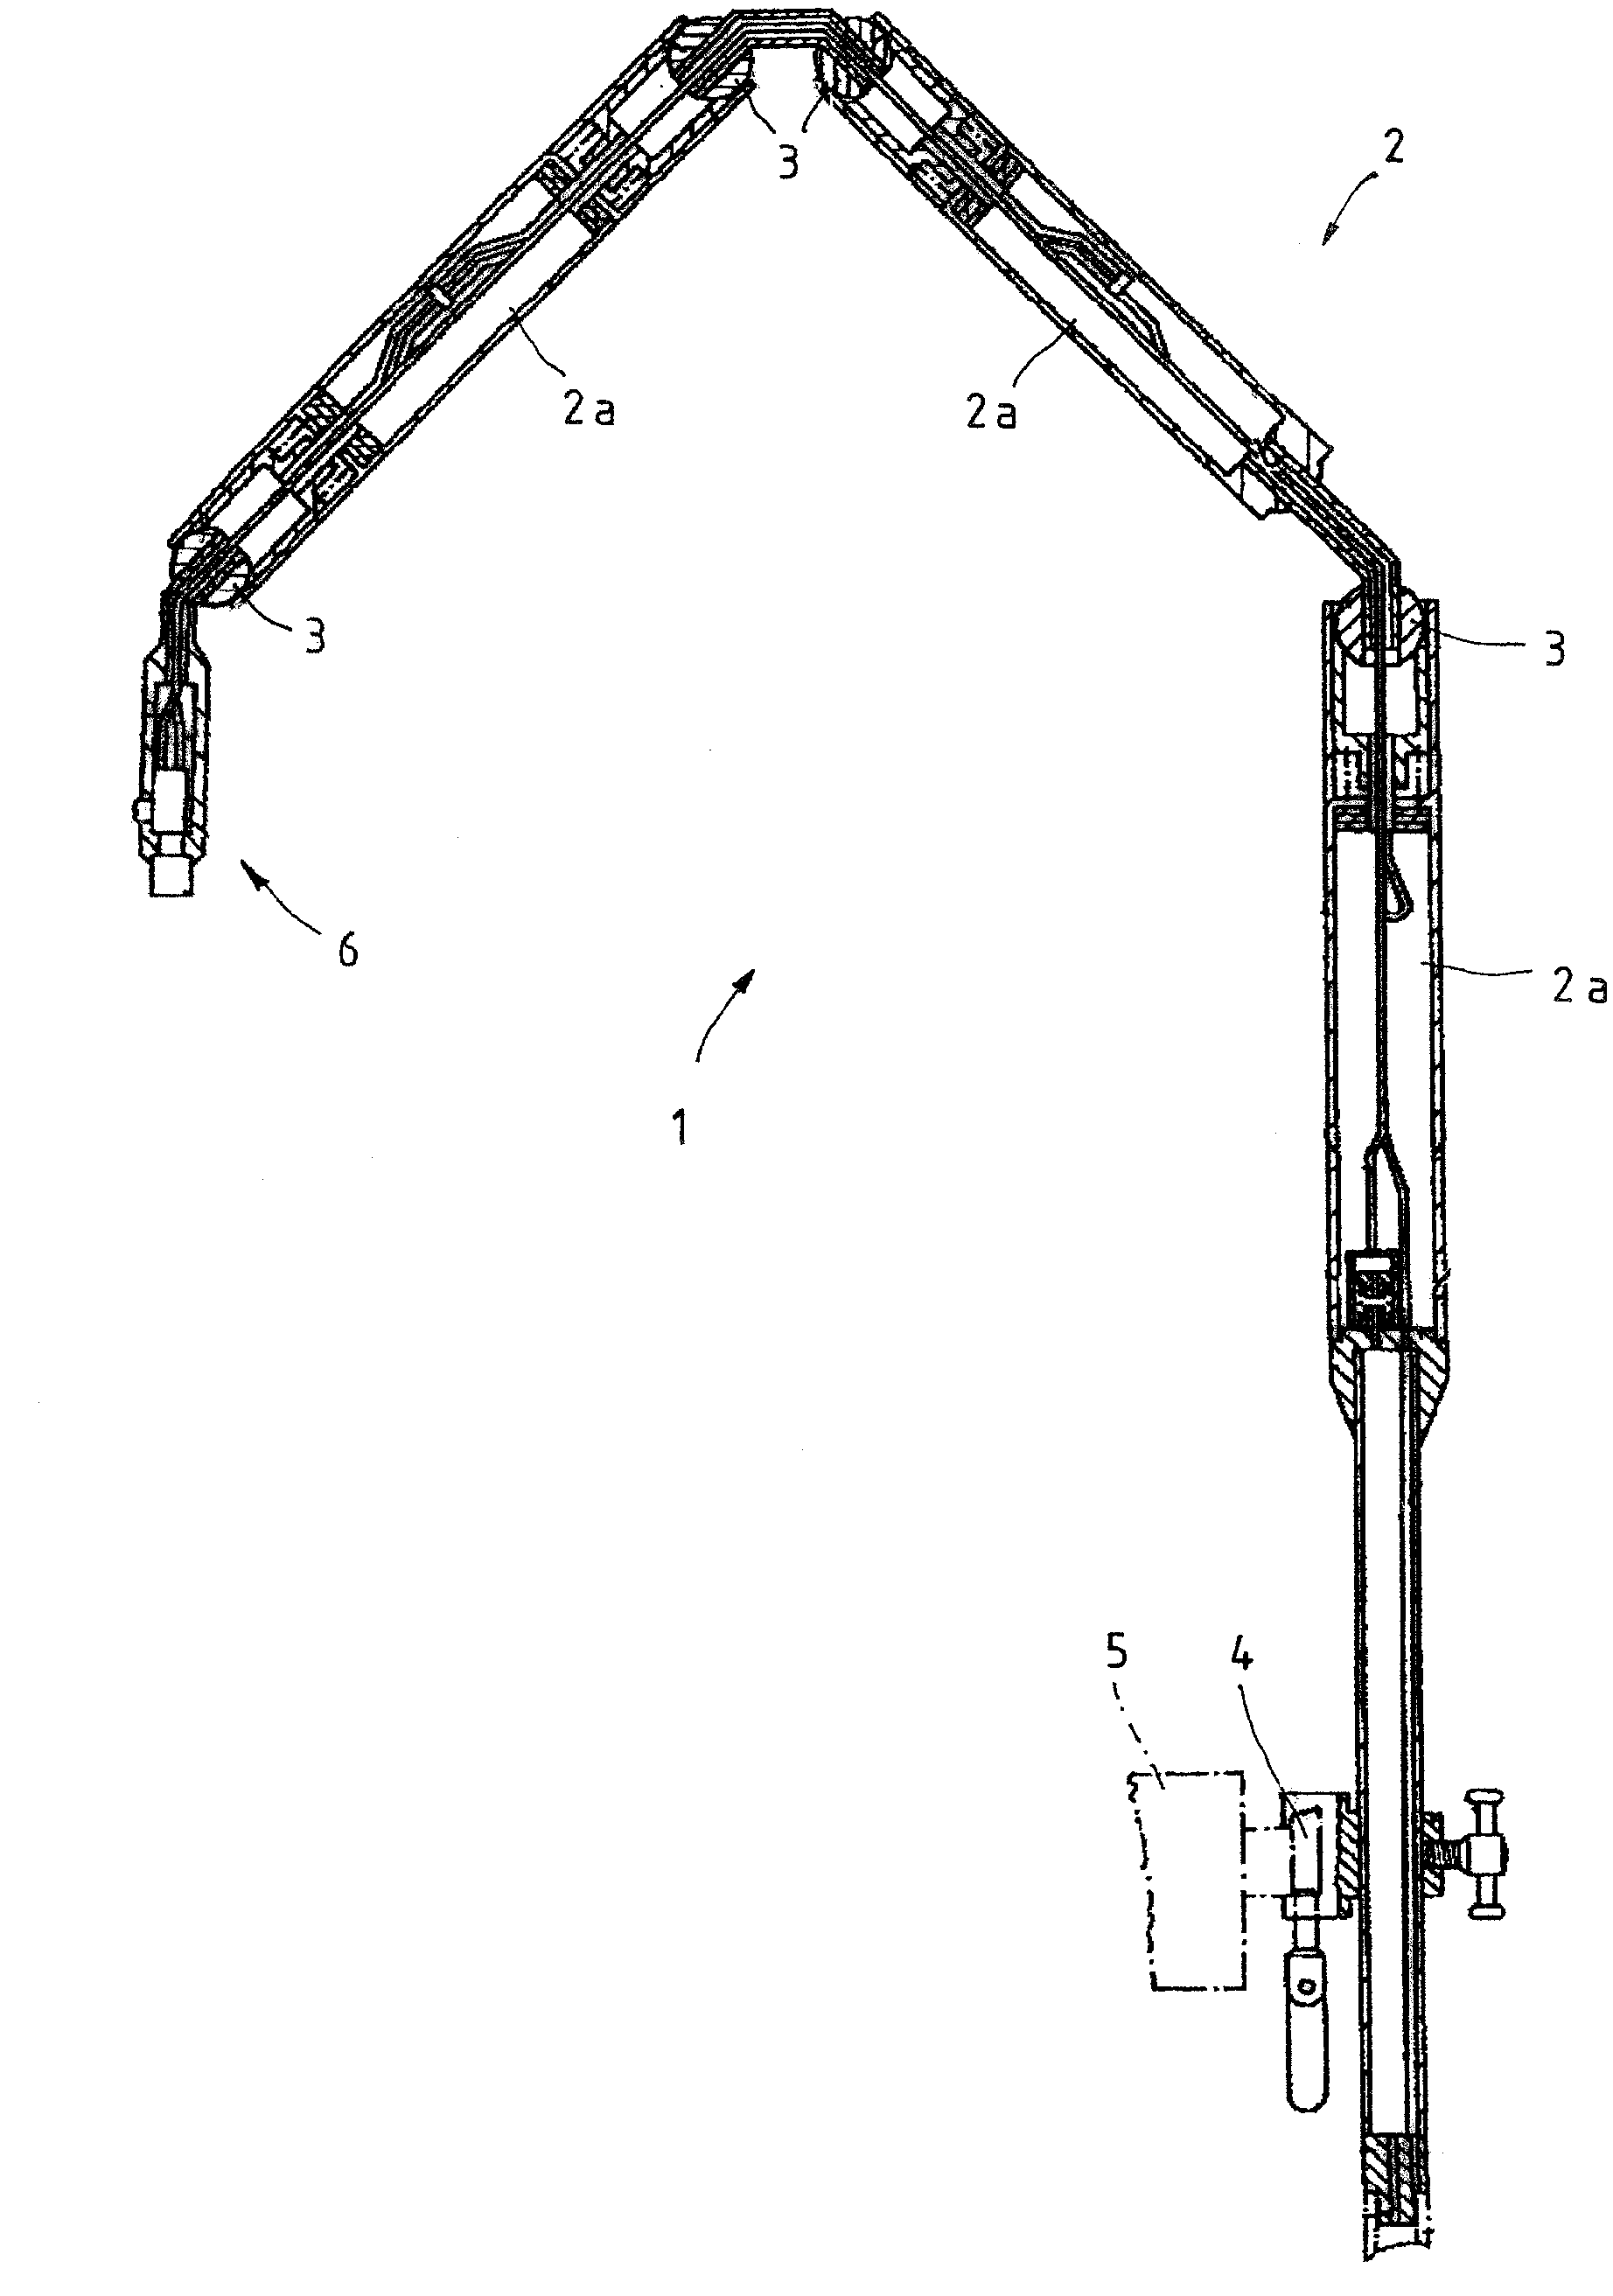 Holding device for medical purposes